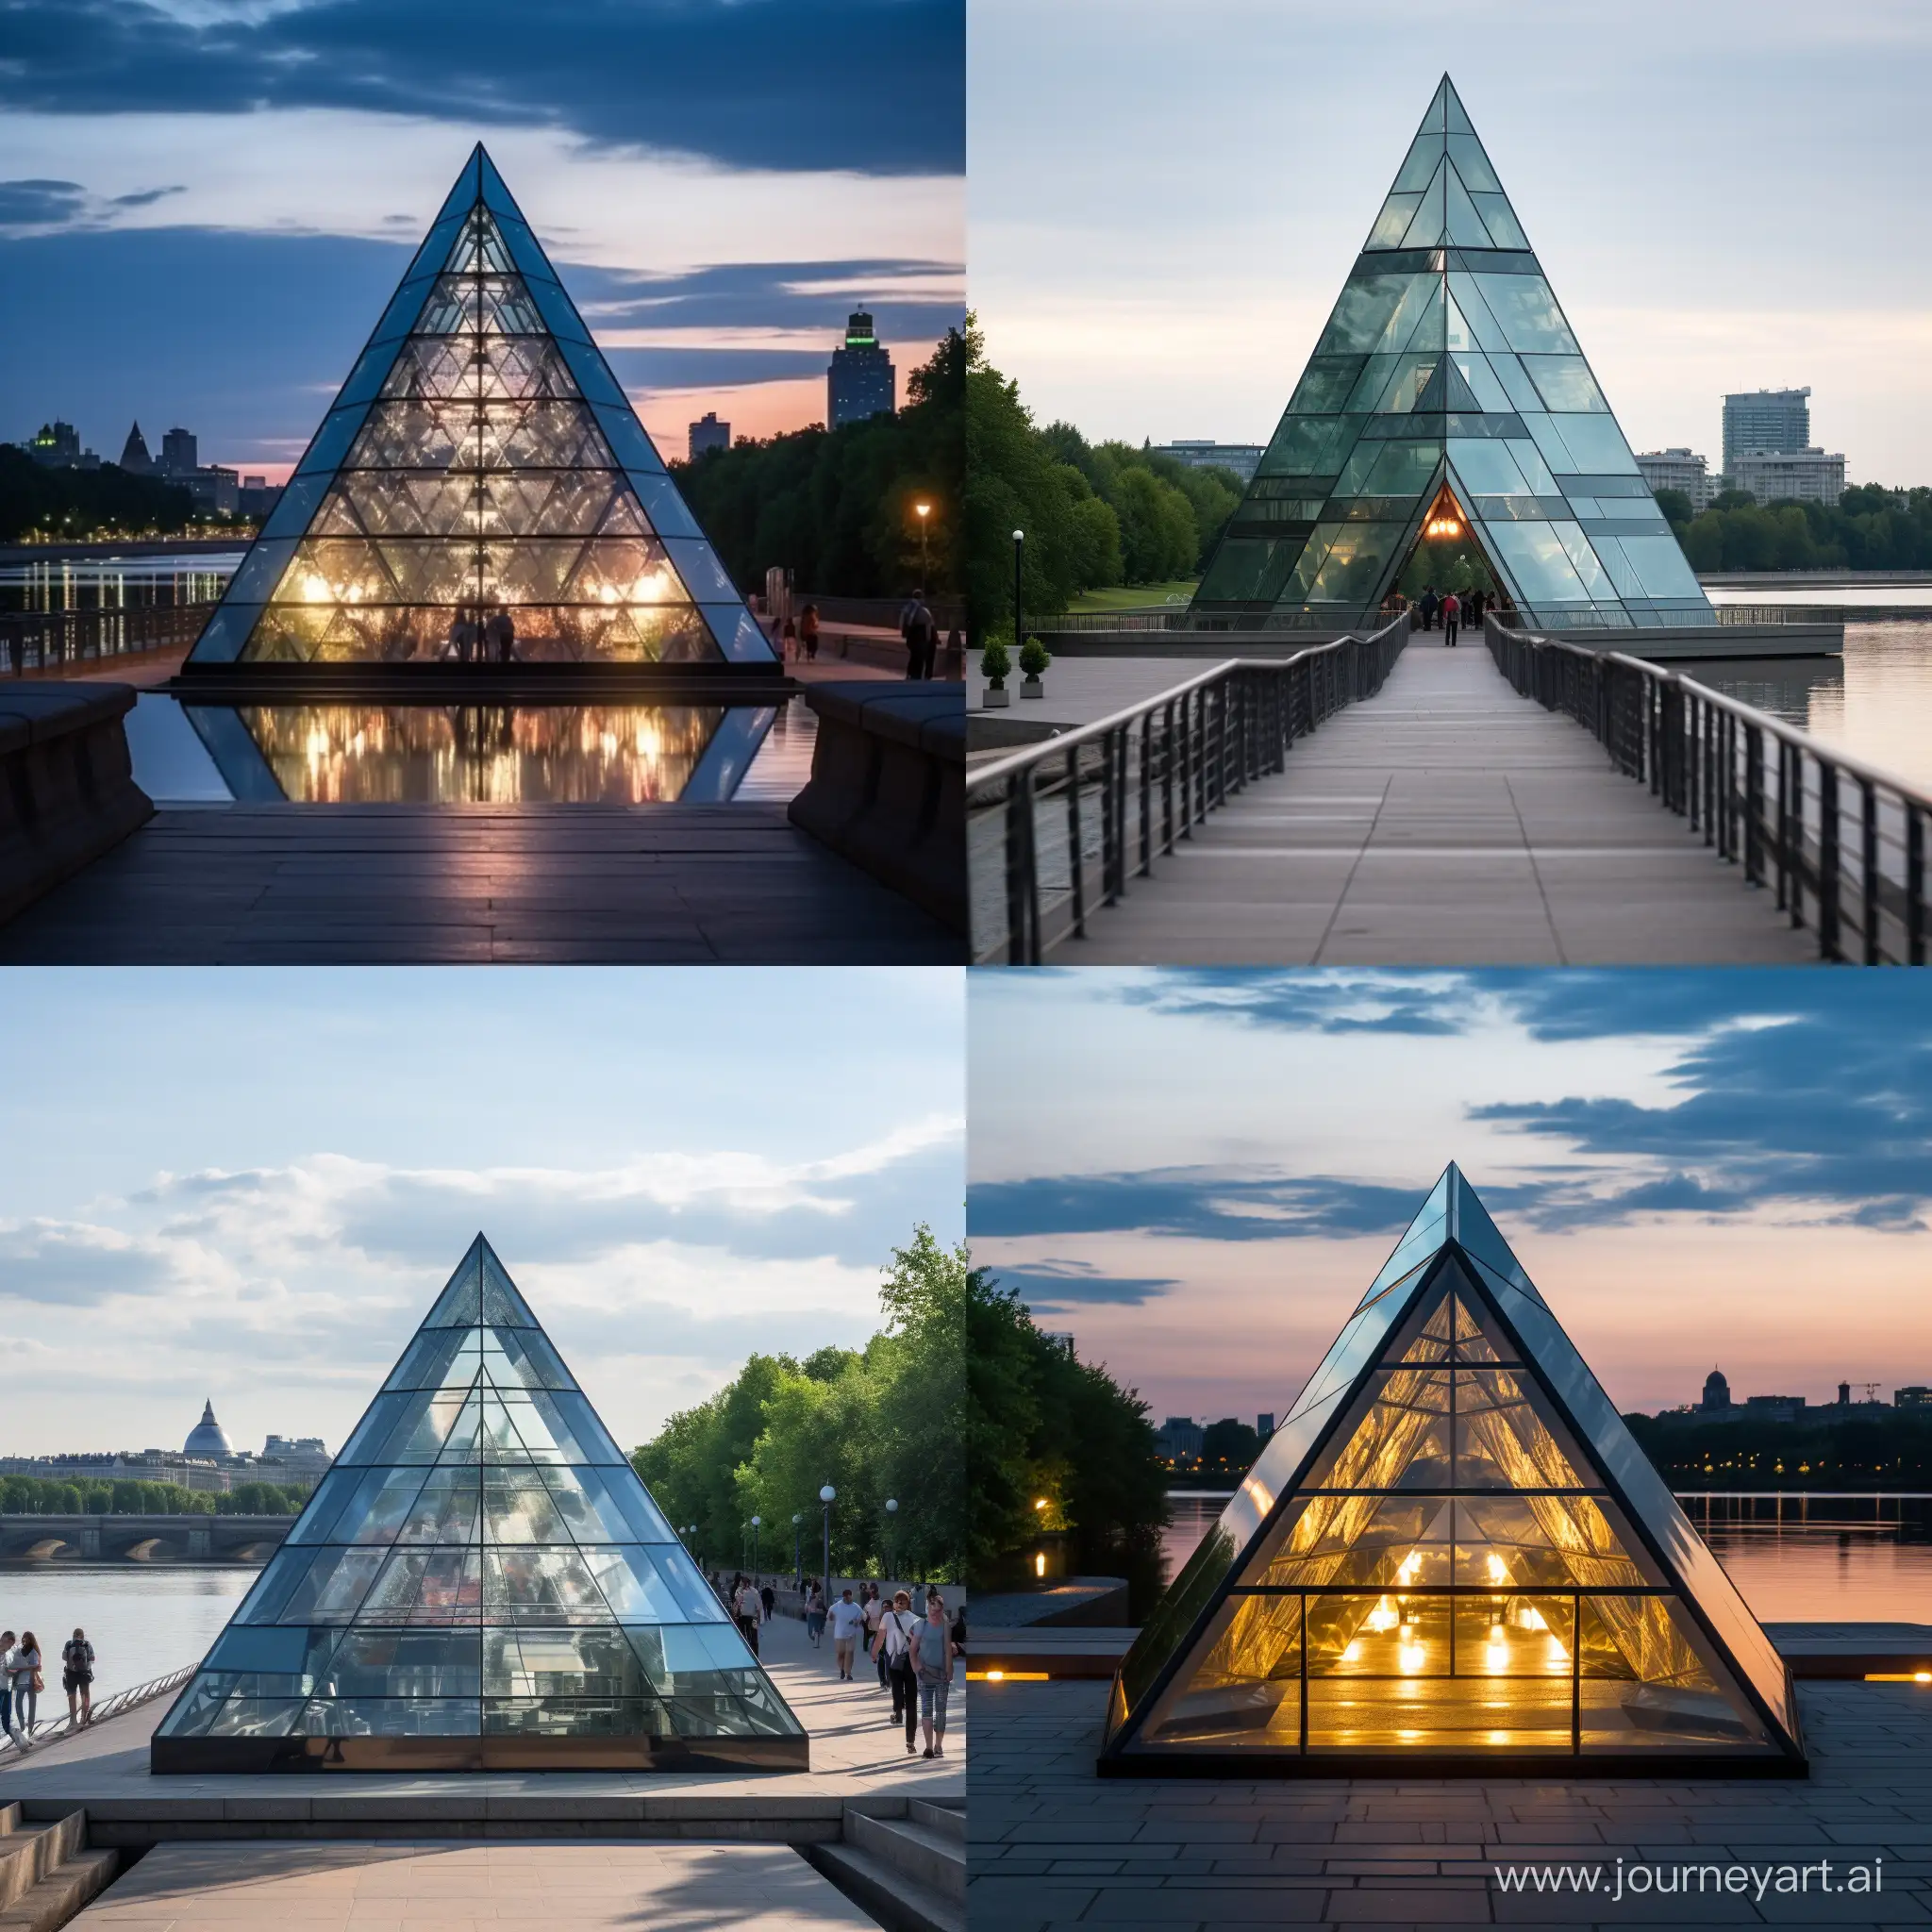 A pyramidal object made of glass, metal and concrete stands at the descent to the river on the Moscow River embankment